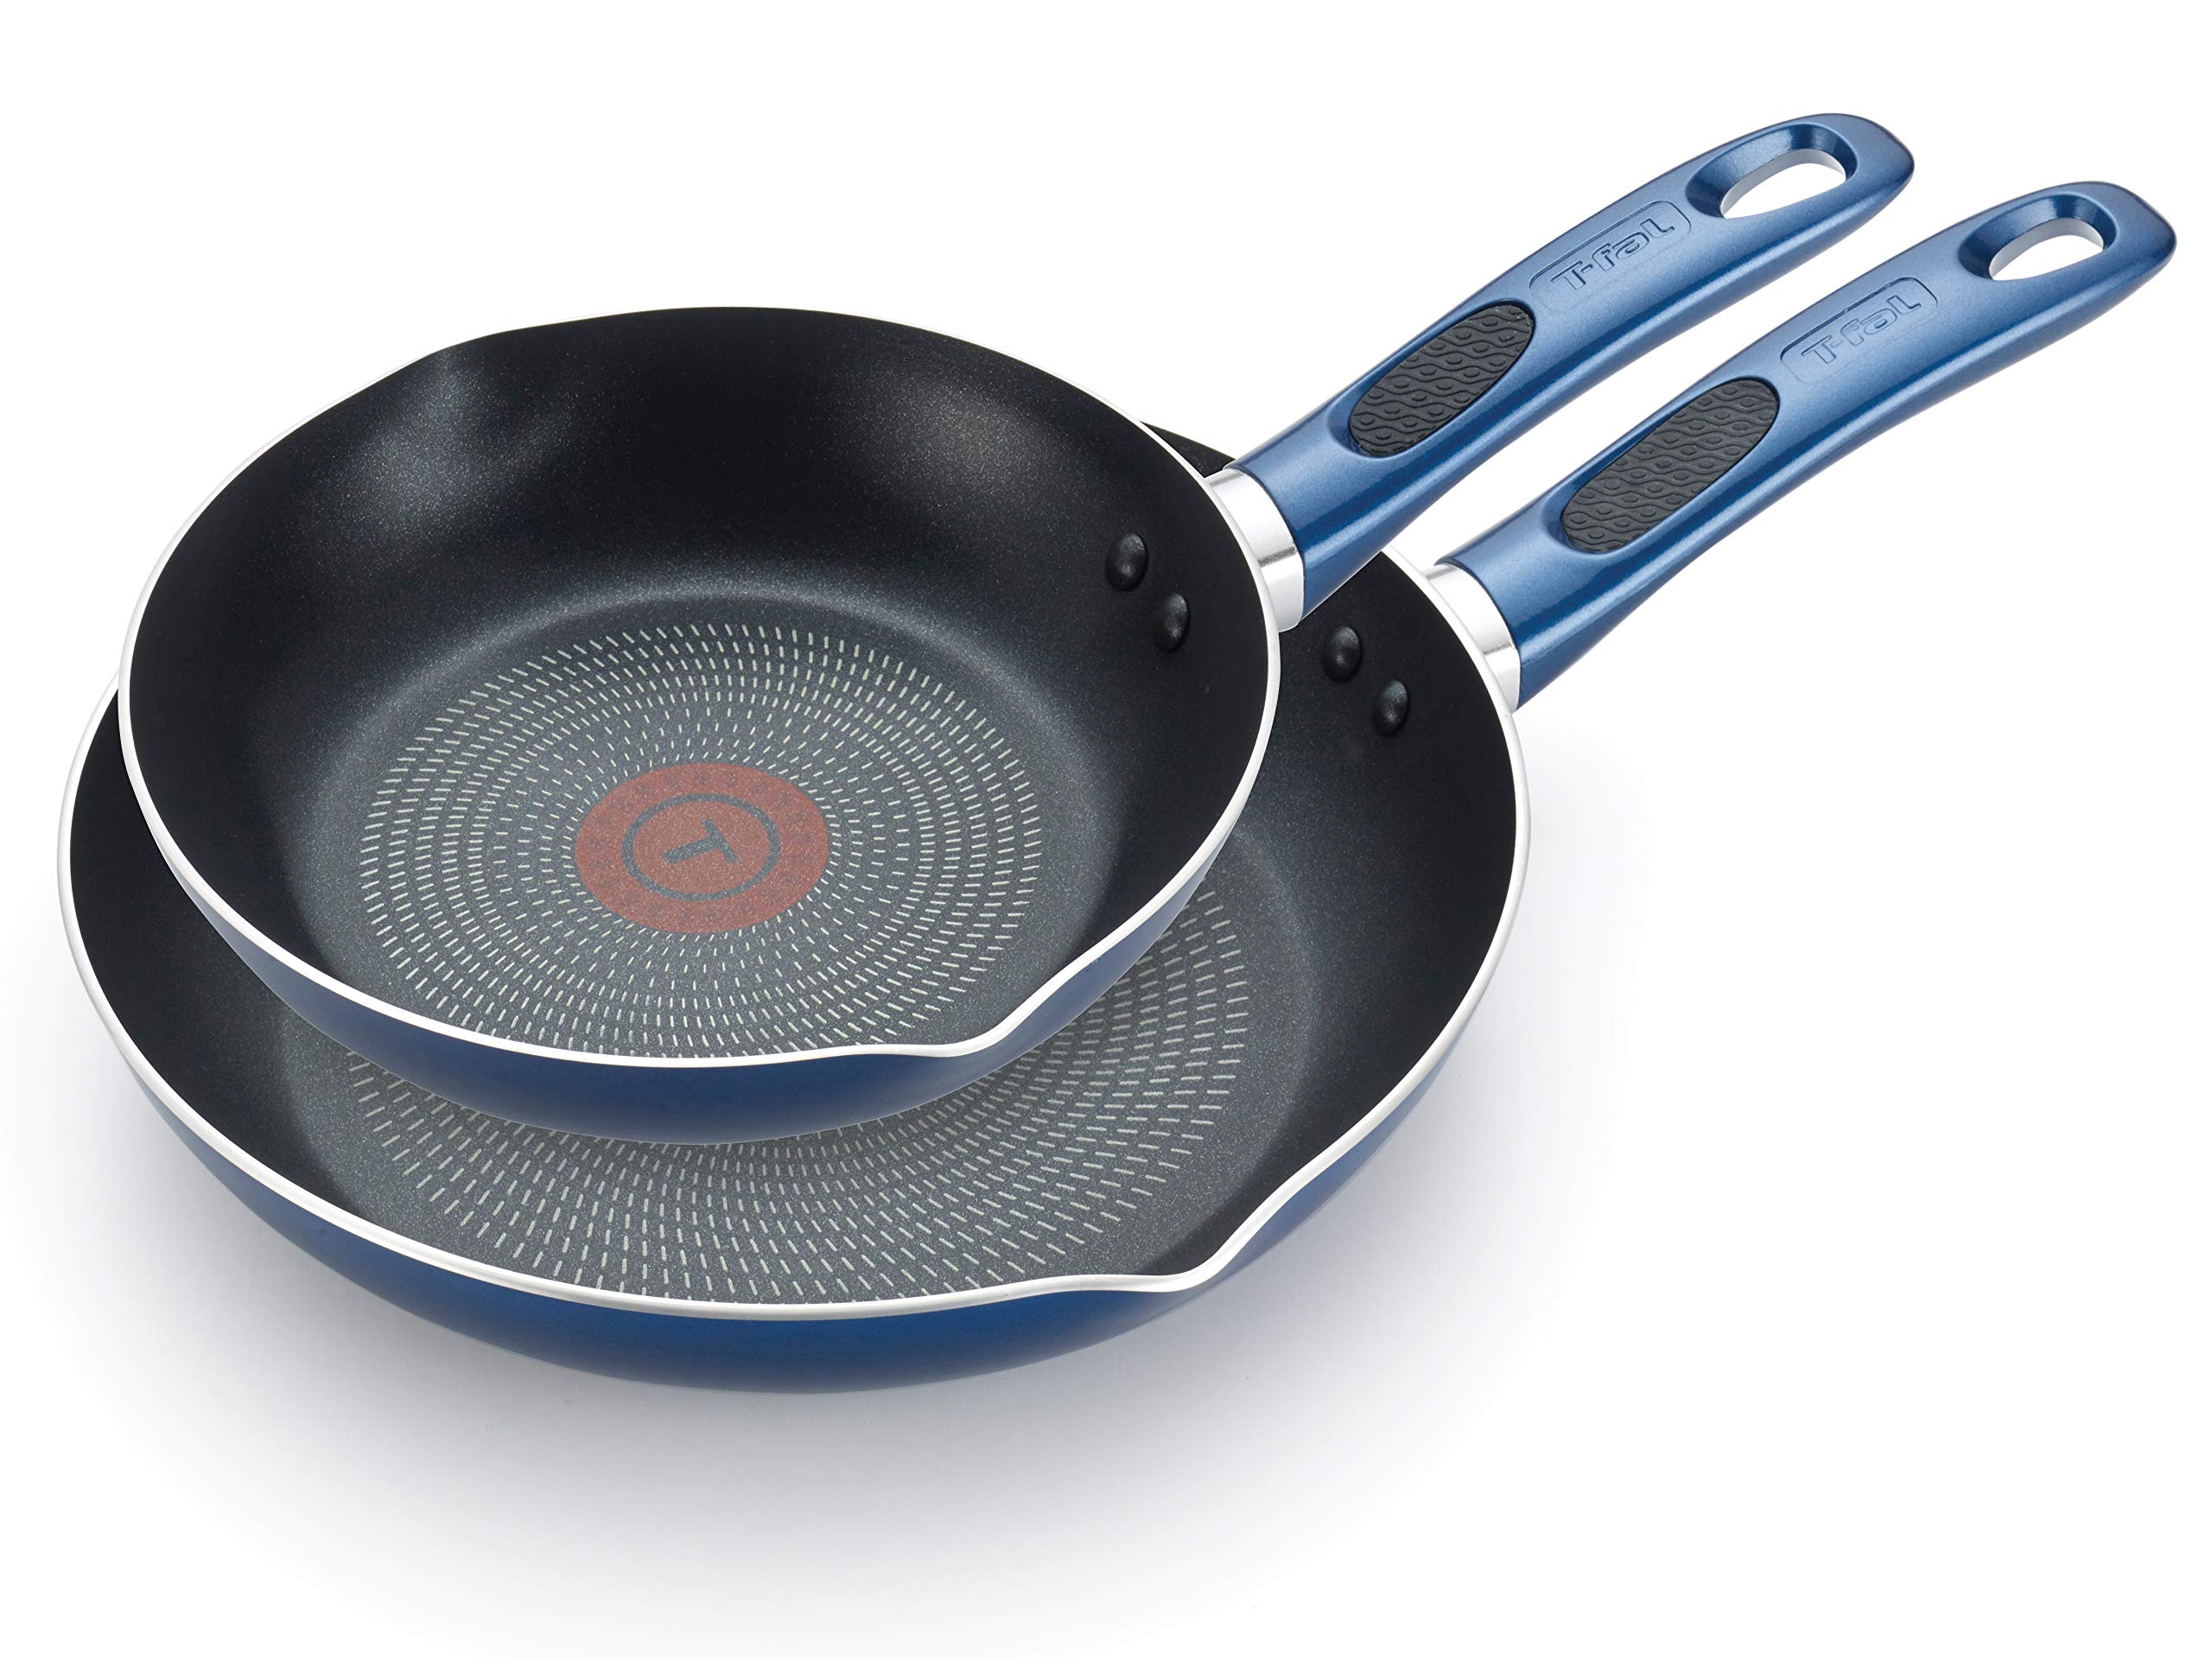 2-Piece T-Fal Excite Nonstick Cookware Fry Pan Set w/ Pouring Spouts (8" & 10.5", Blue) $20 + Free Shipping w/ Prime or on $35+